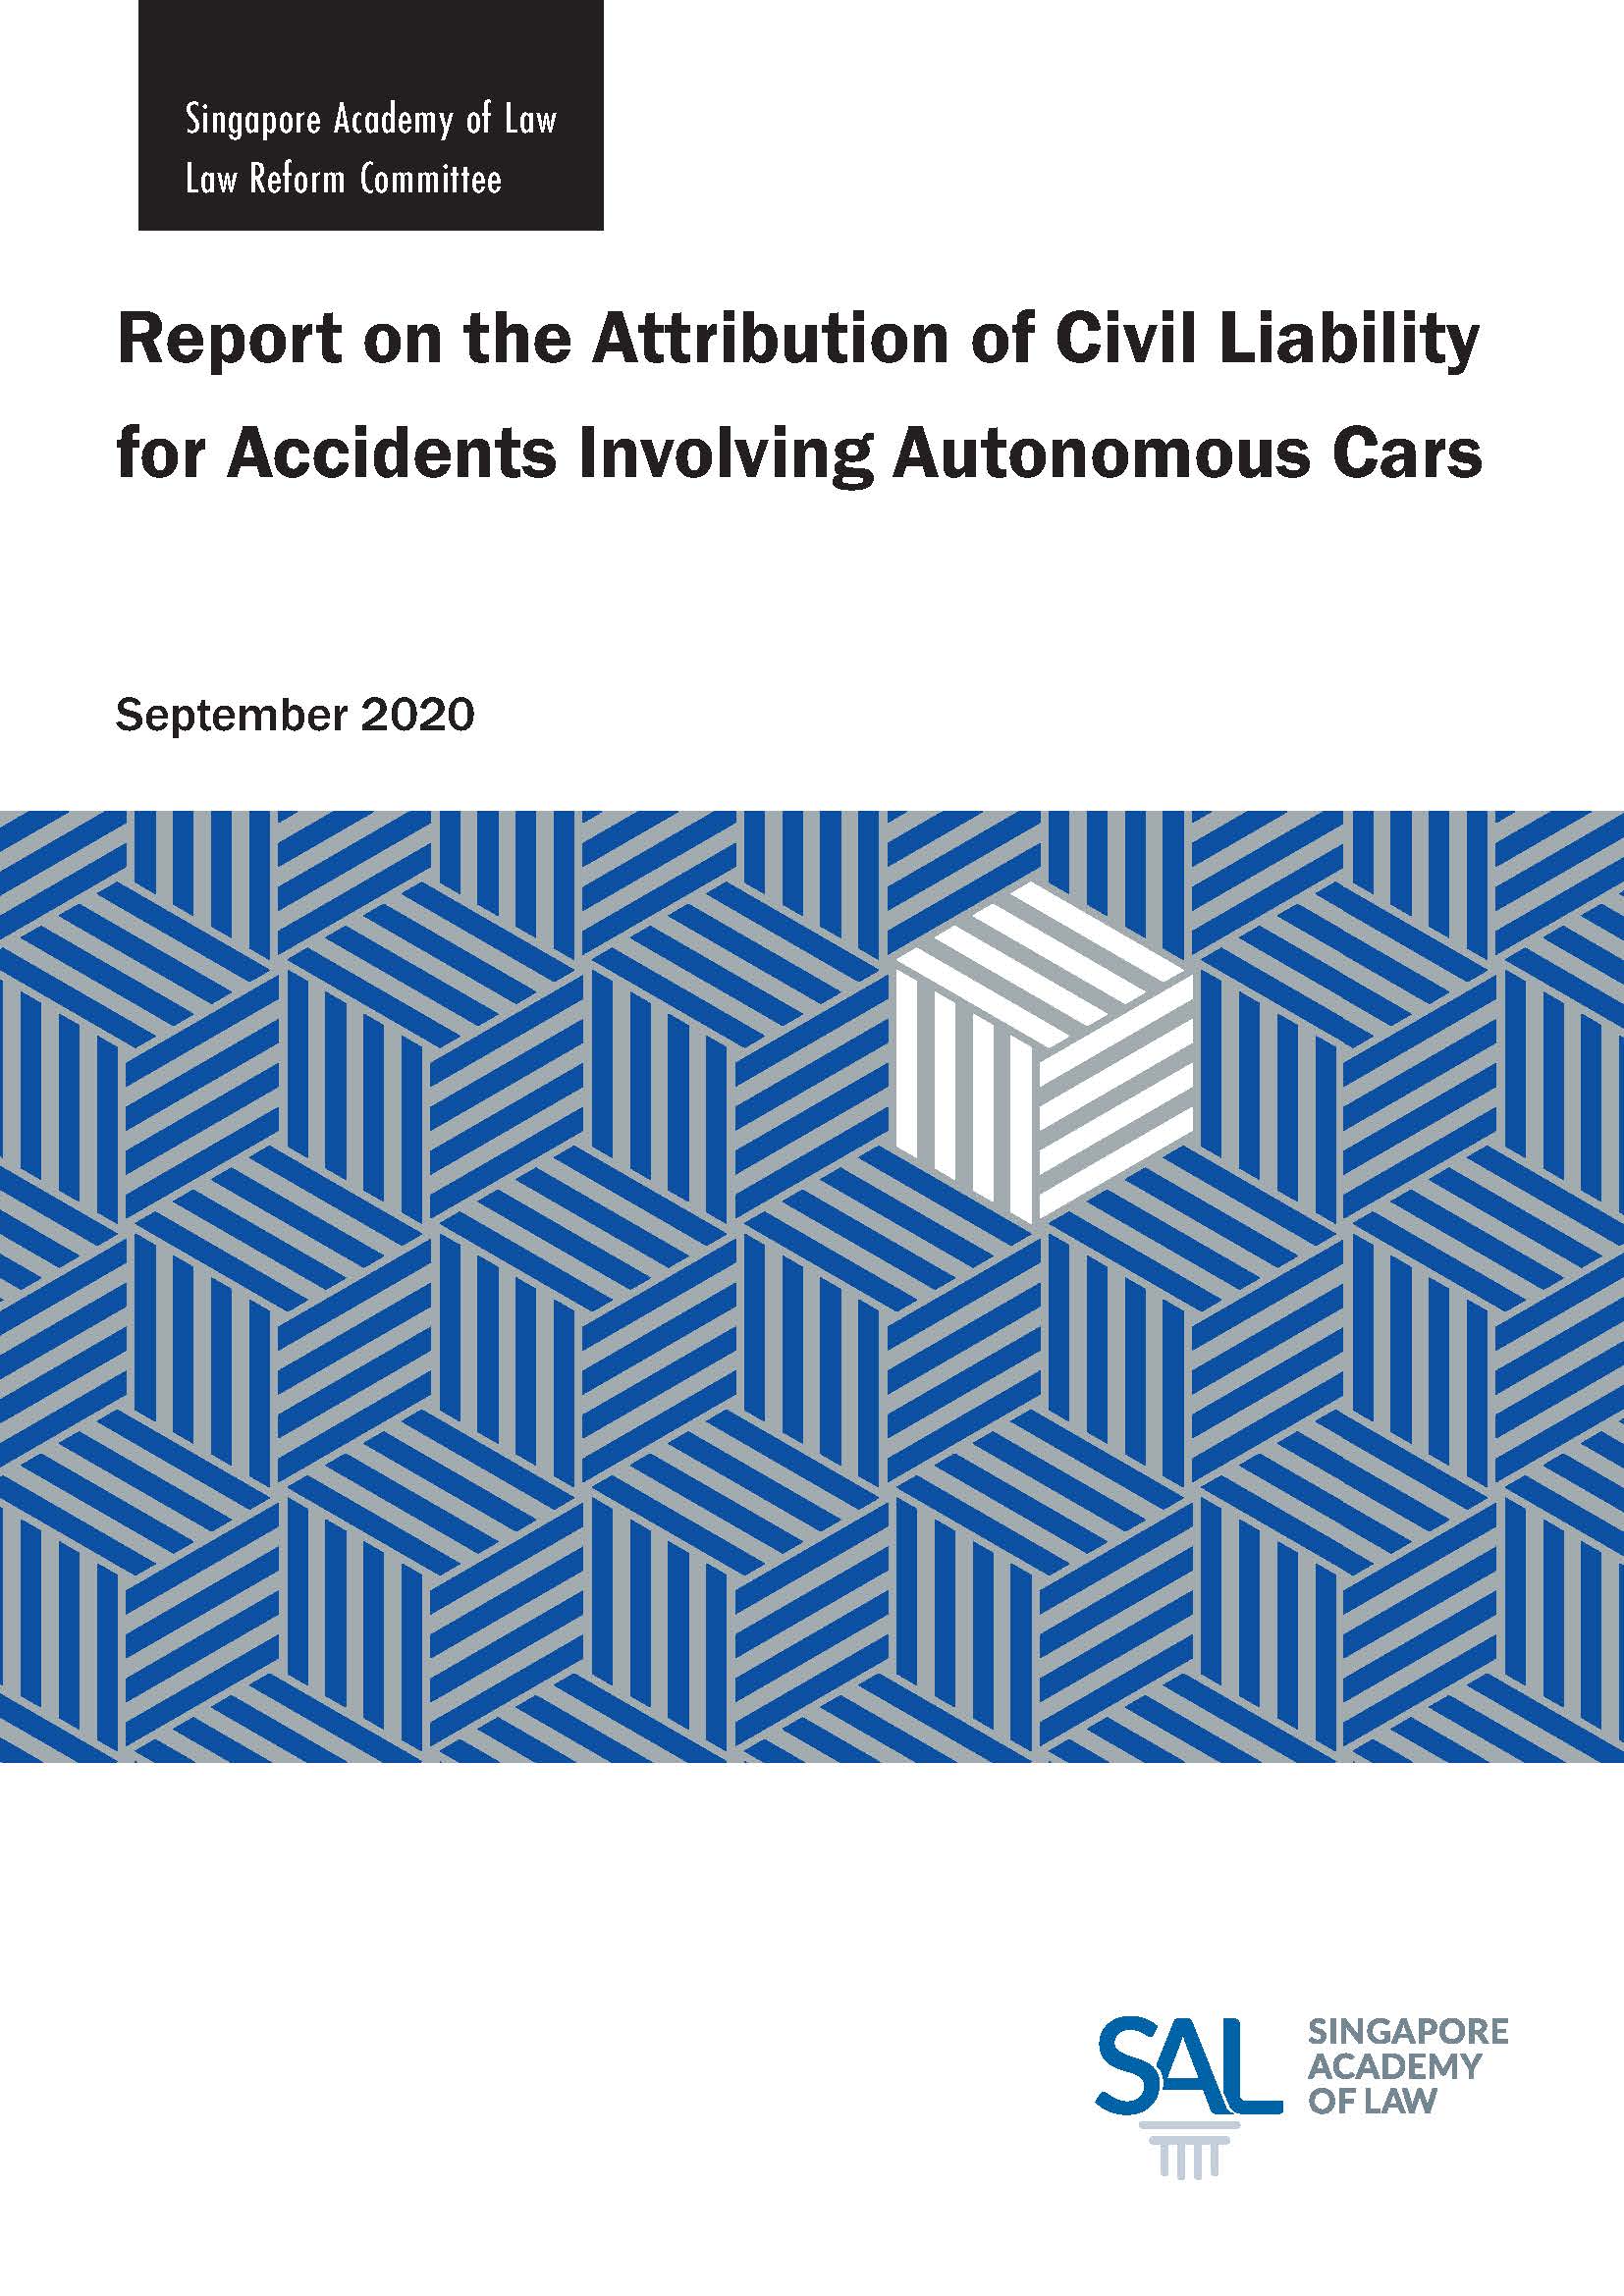 2020 Report on the Attribution of Civil Liability for Accidents Involving Autonomous Cars